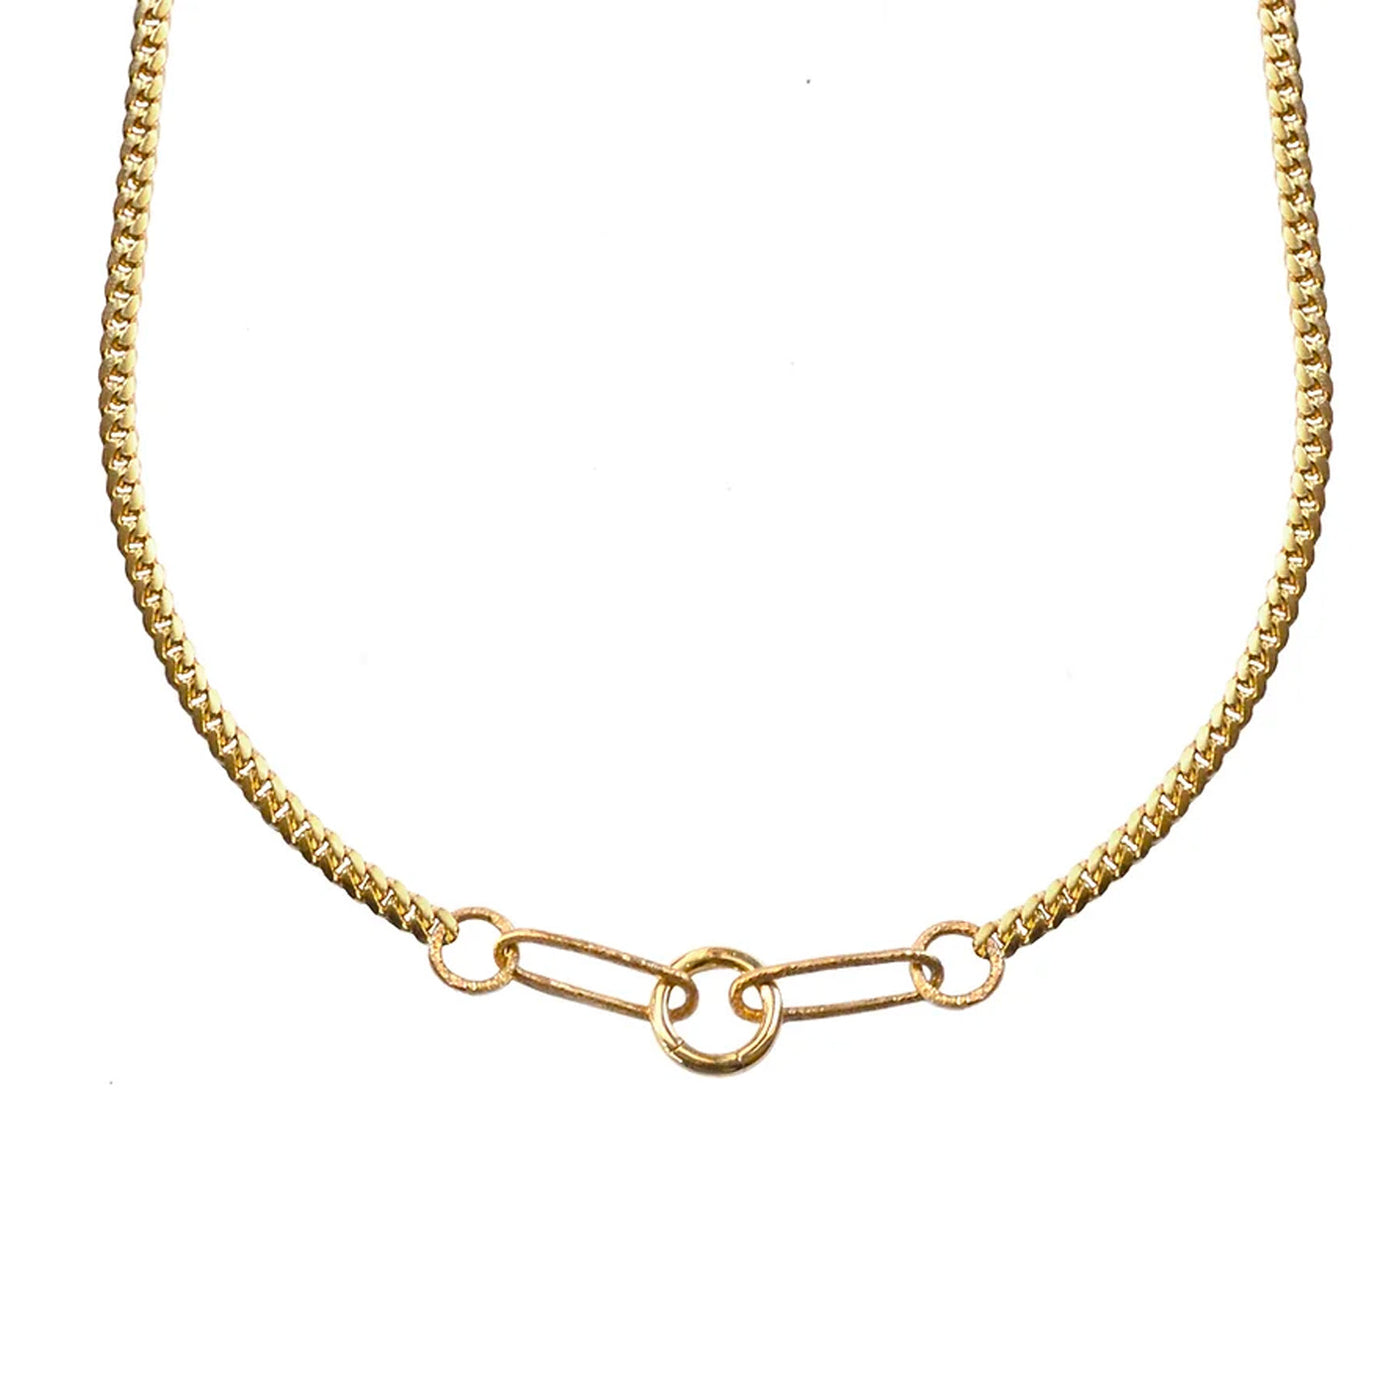 Five Link Charm Holder Chain Necklace